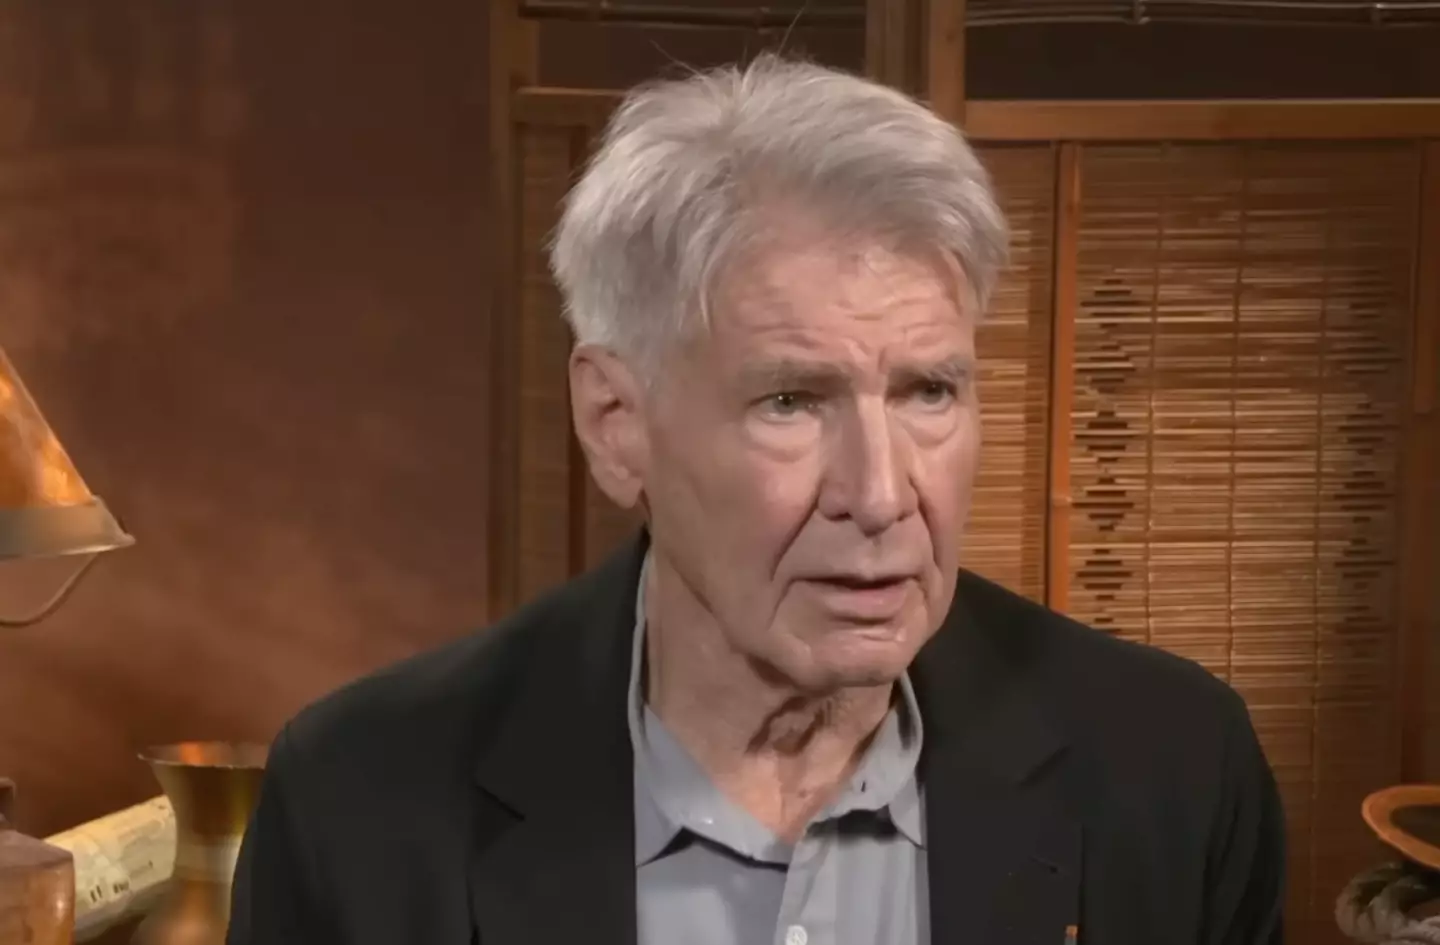 Harrison Ford has also just returned as Indiana Jones.